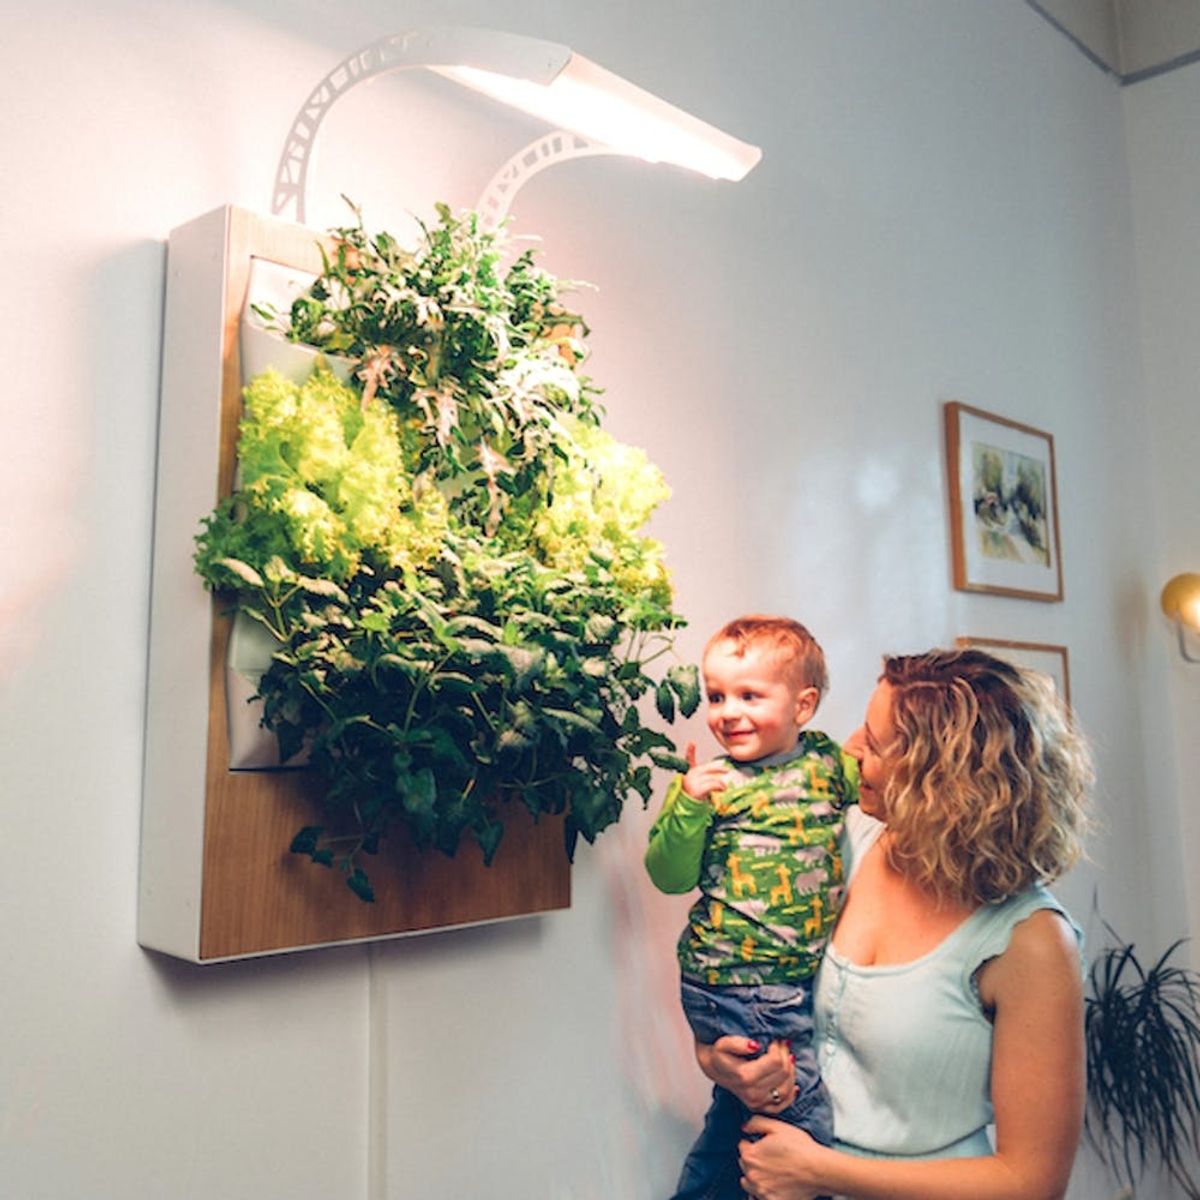 Get Your Grow on With This Easy Indoor Garden System